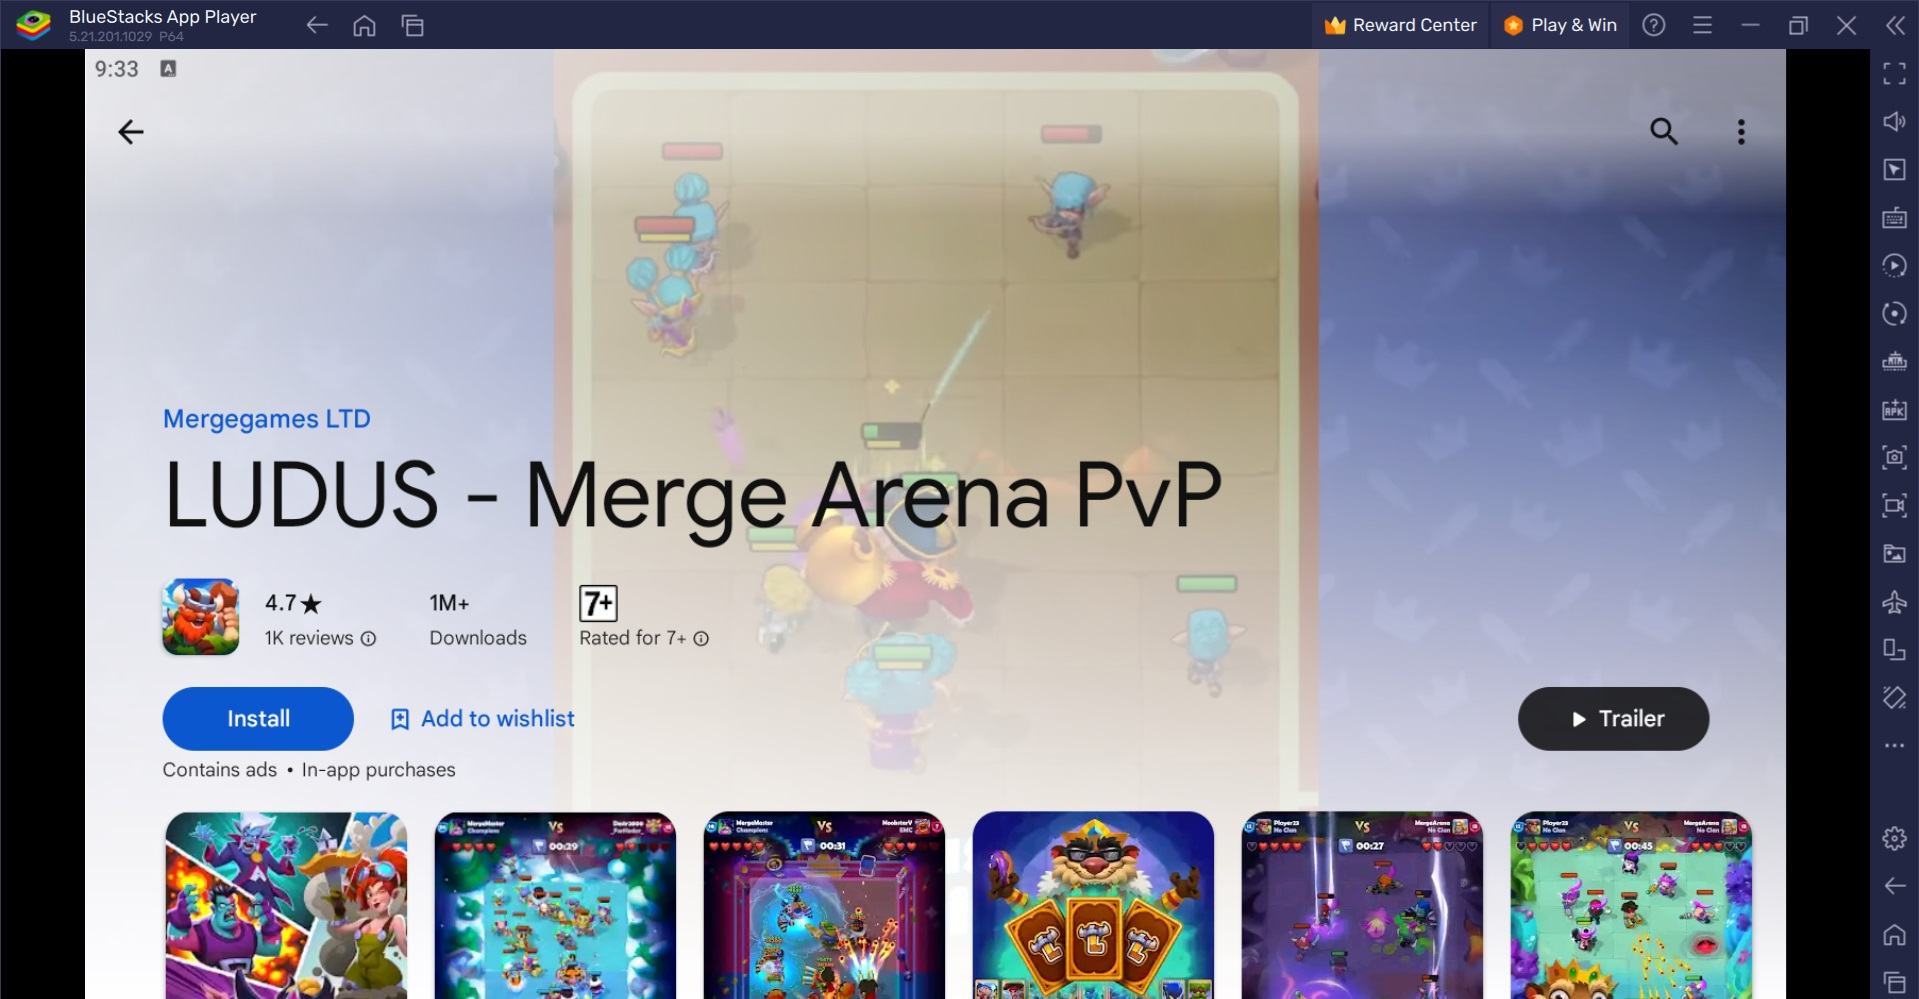 How to Play LUDUS - Merge Arena PvP on PC with BlueStacks